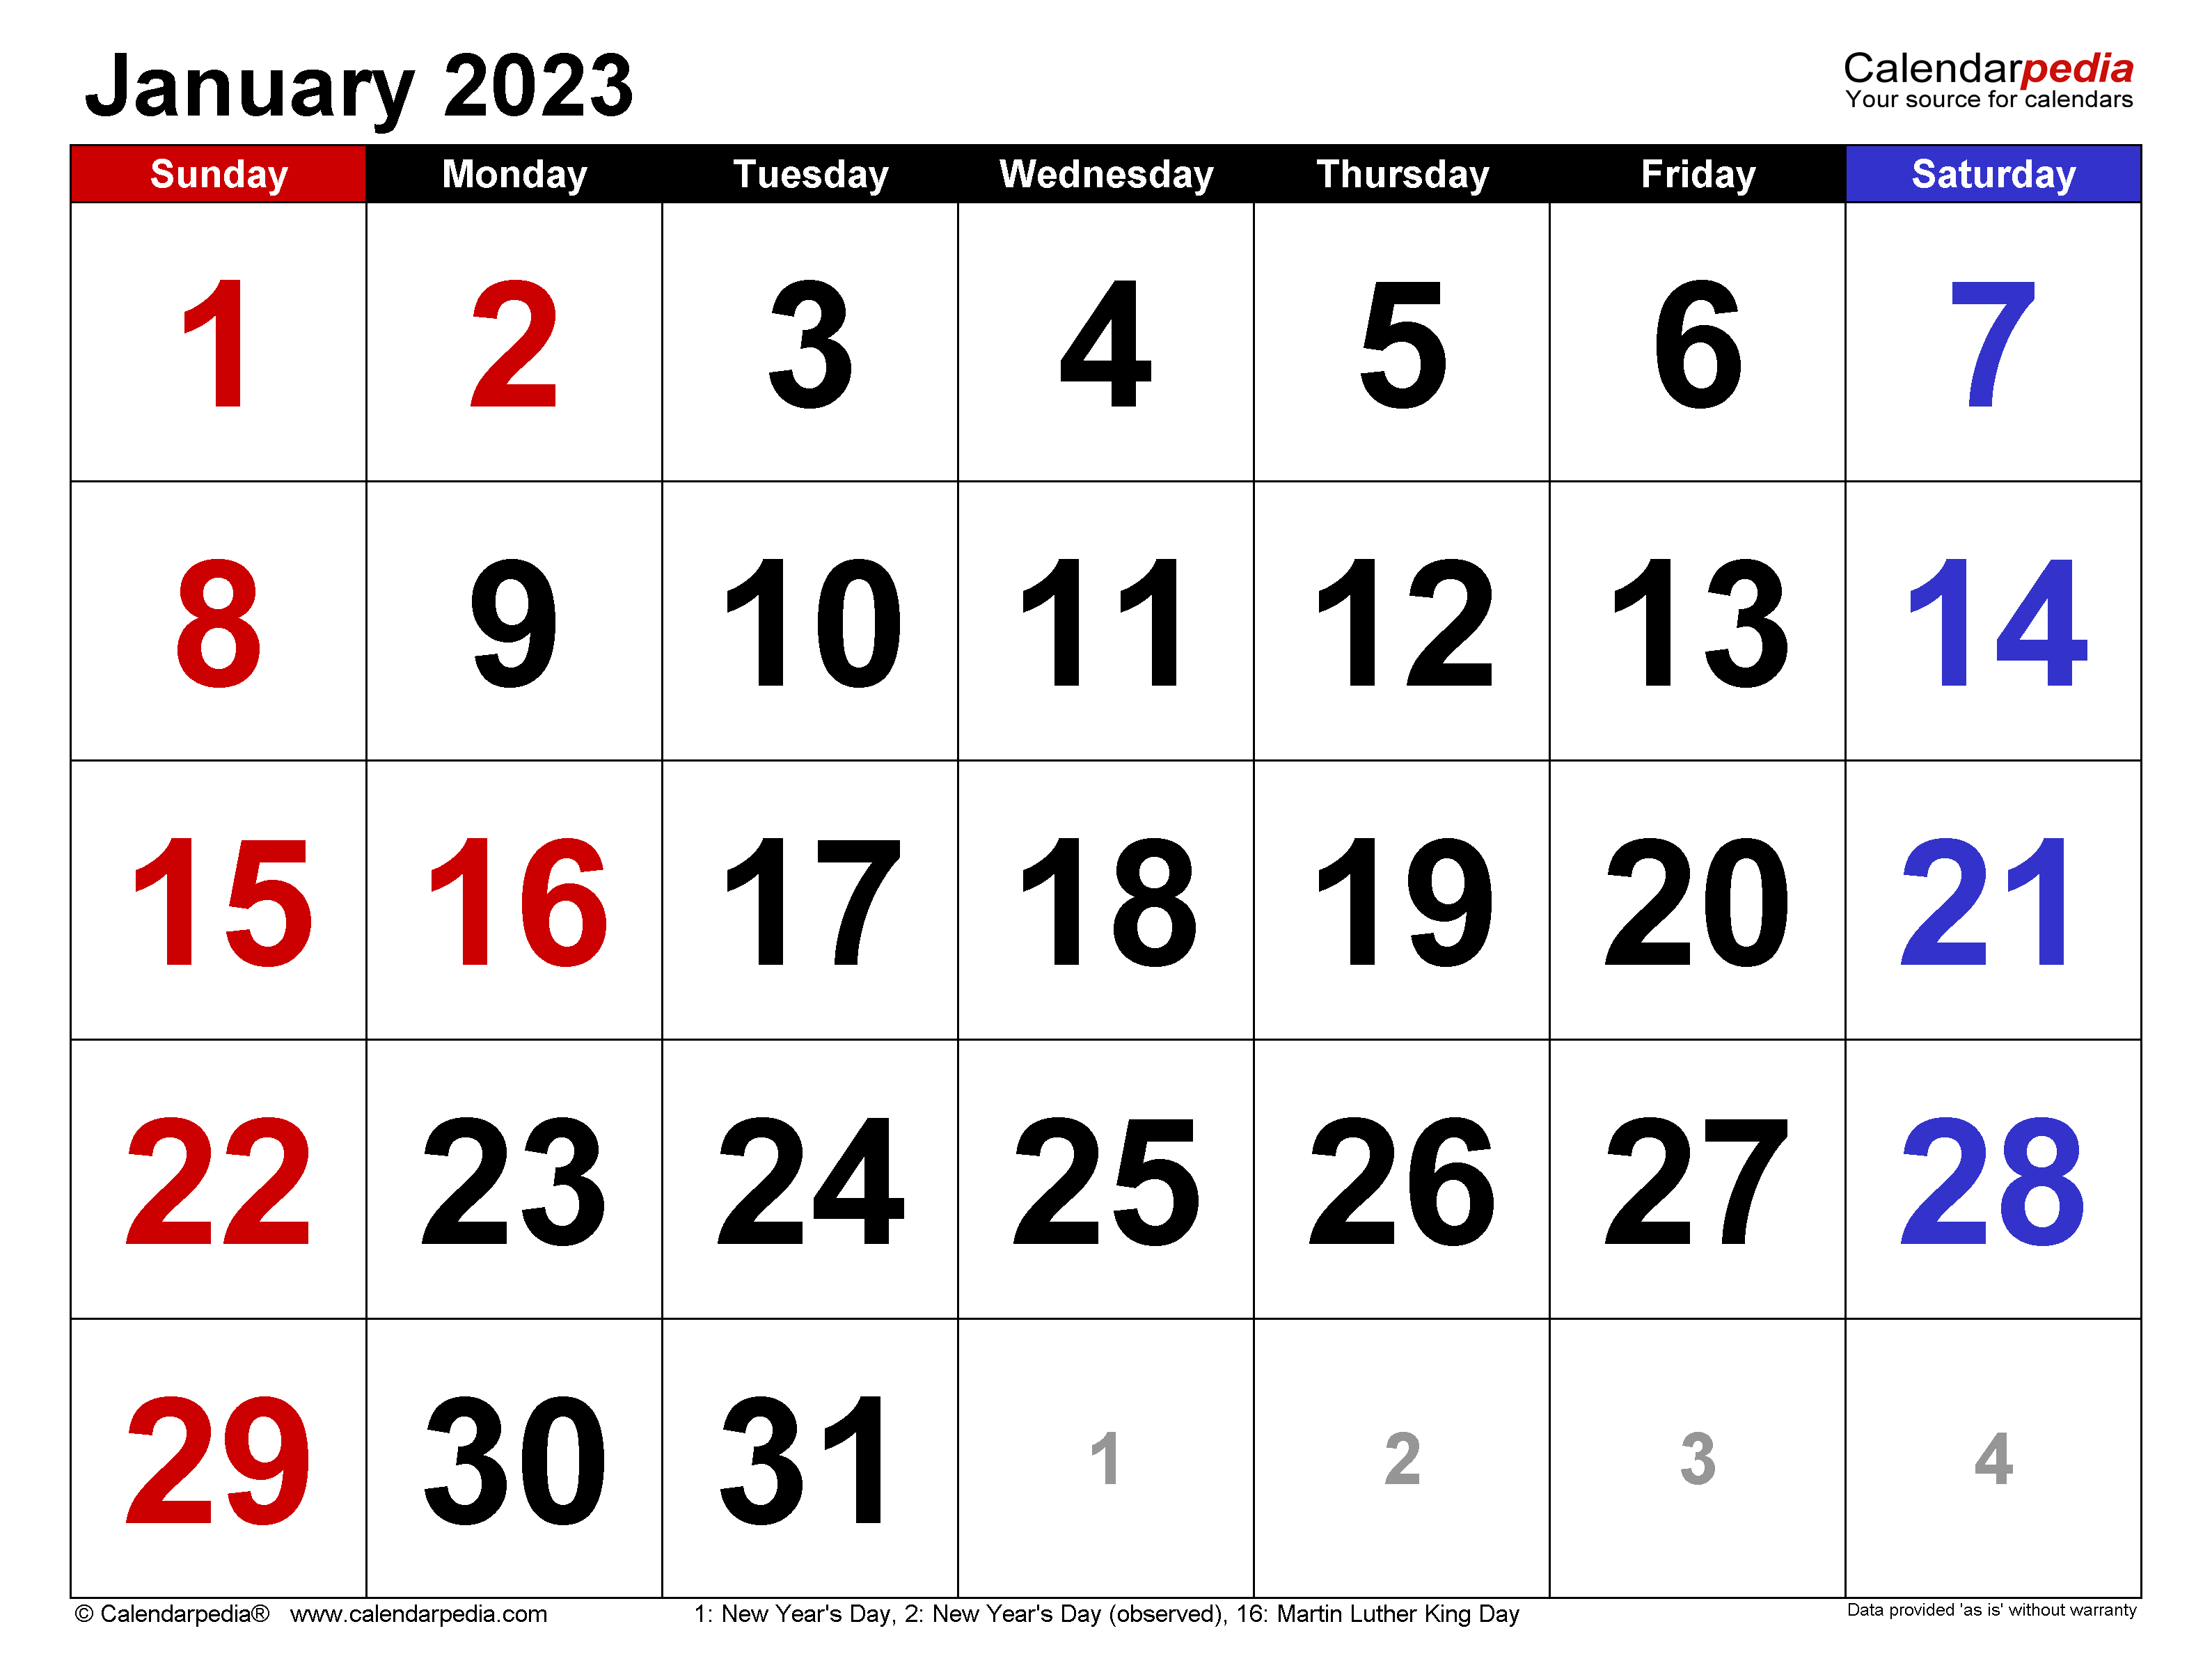 January calendar templates for word excel and pdf